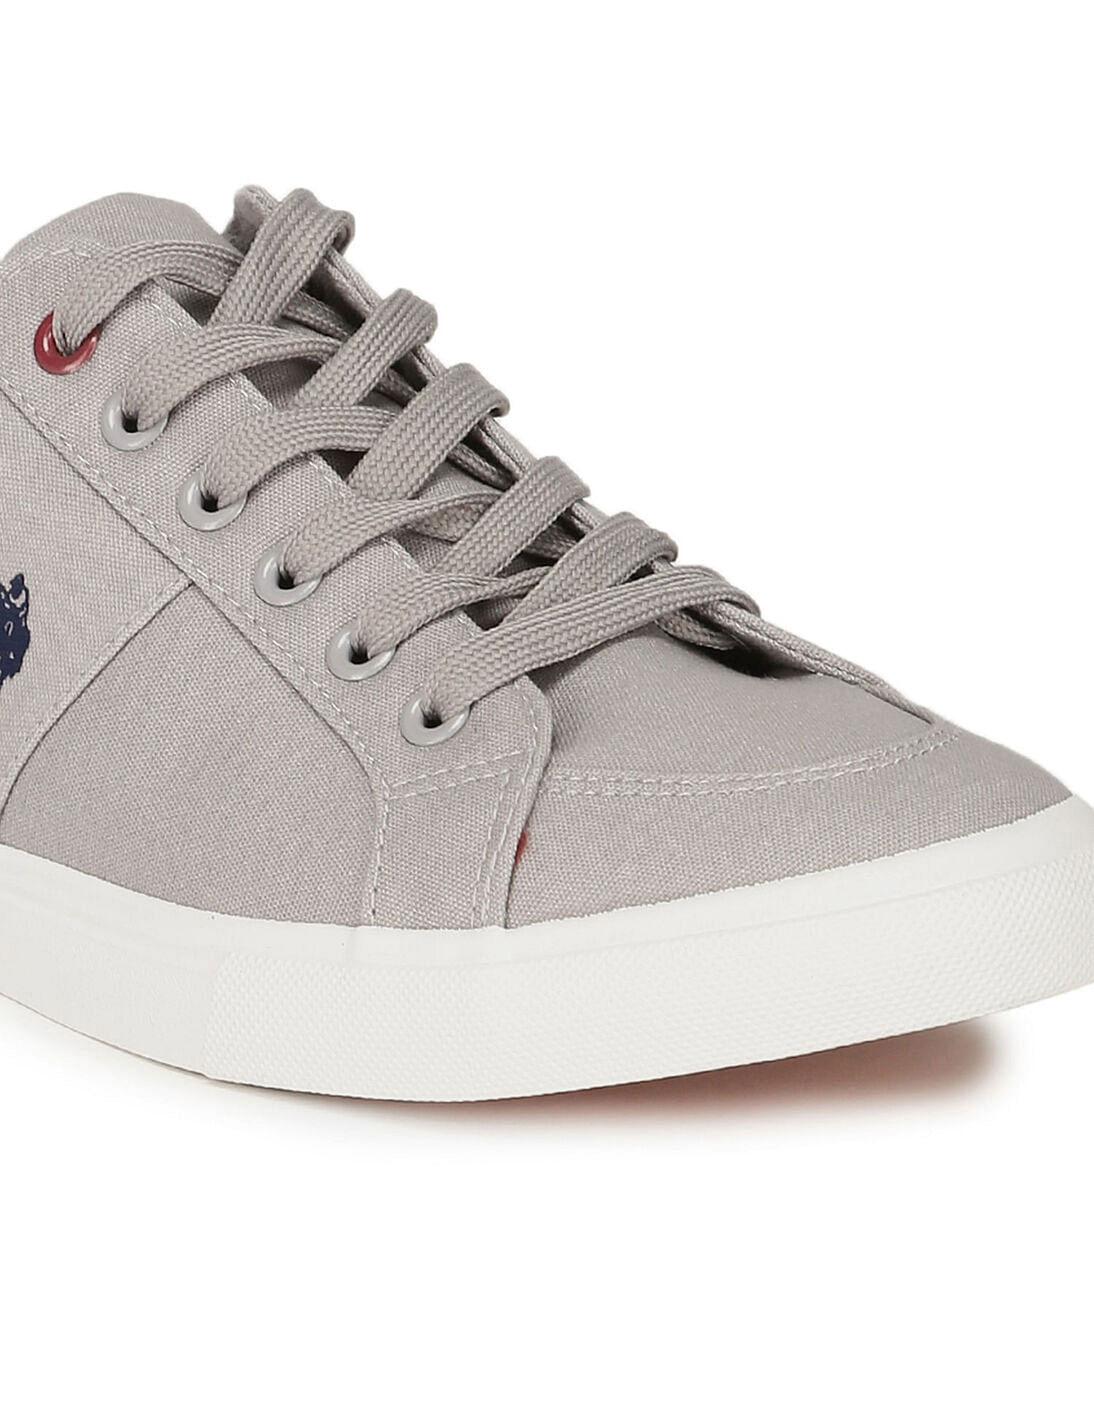 Buy U.S. Polo Assn. Men White Solid Sneakers - Casual Shoes for Men 4267946  | Myntra